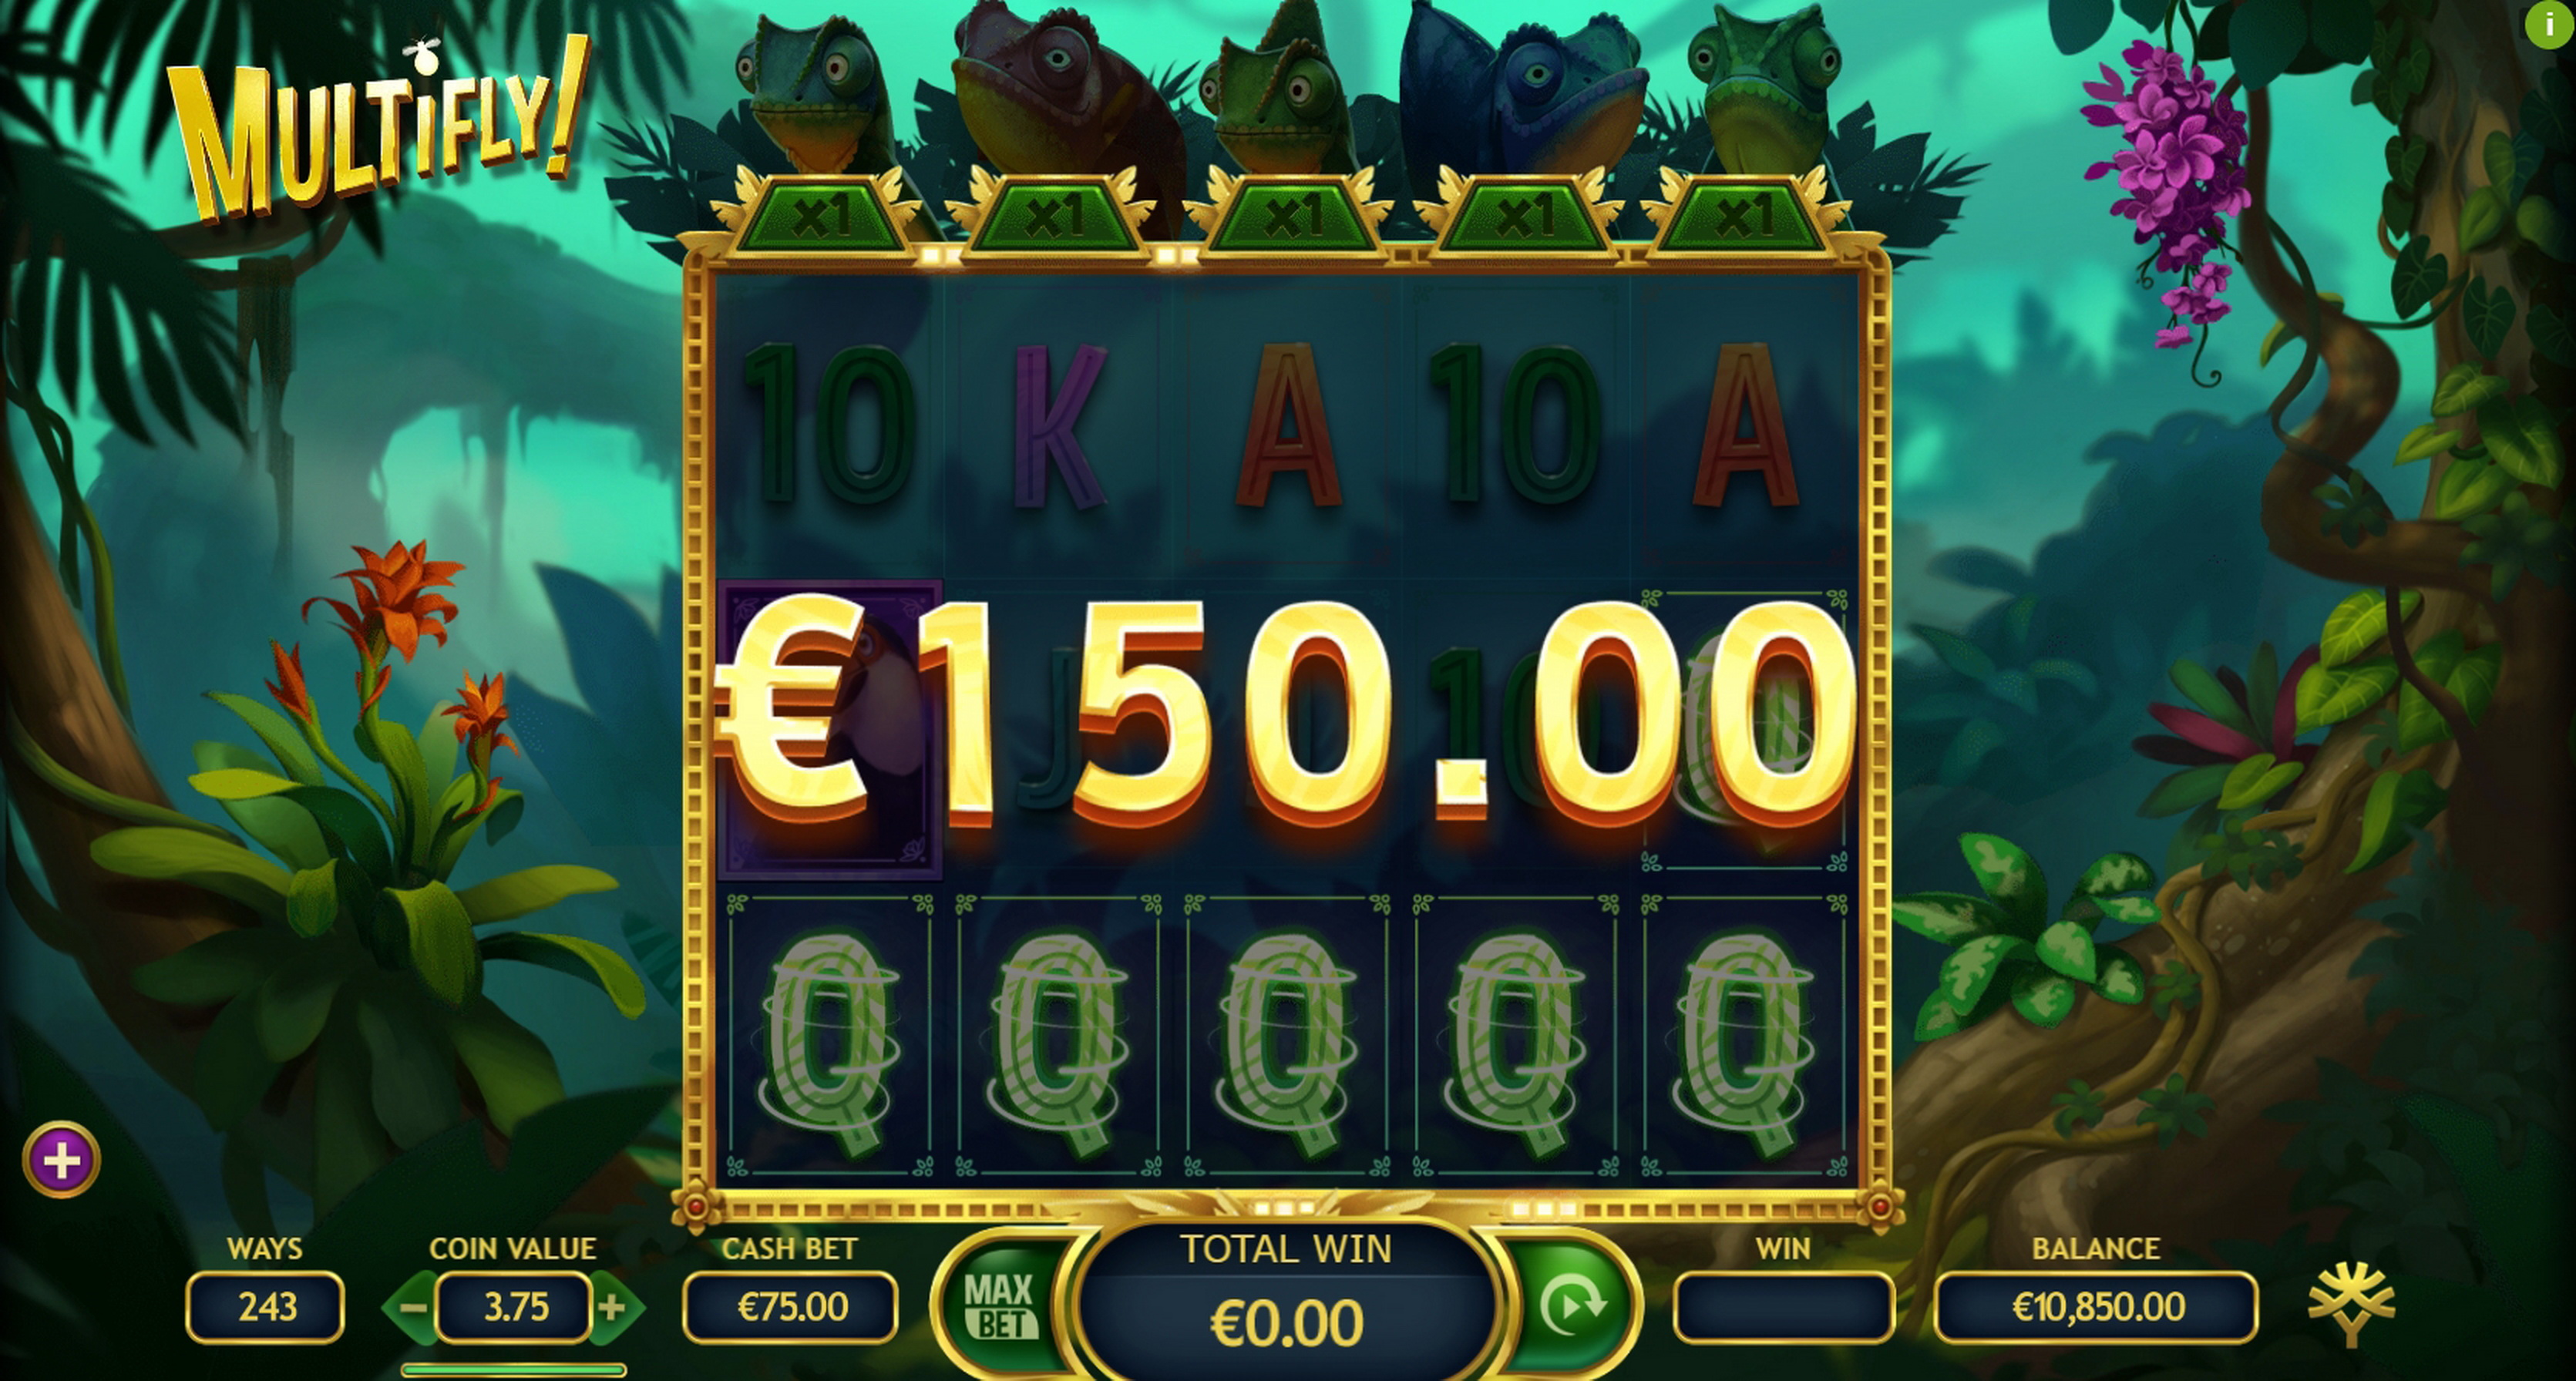 Win Money in MultiFly Free Slot Game by Yggdrasil Gaming